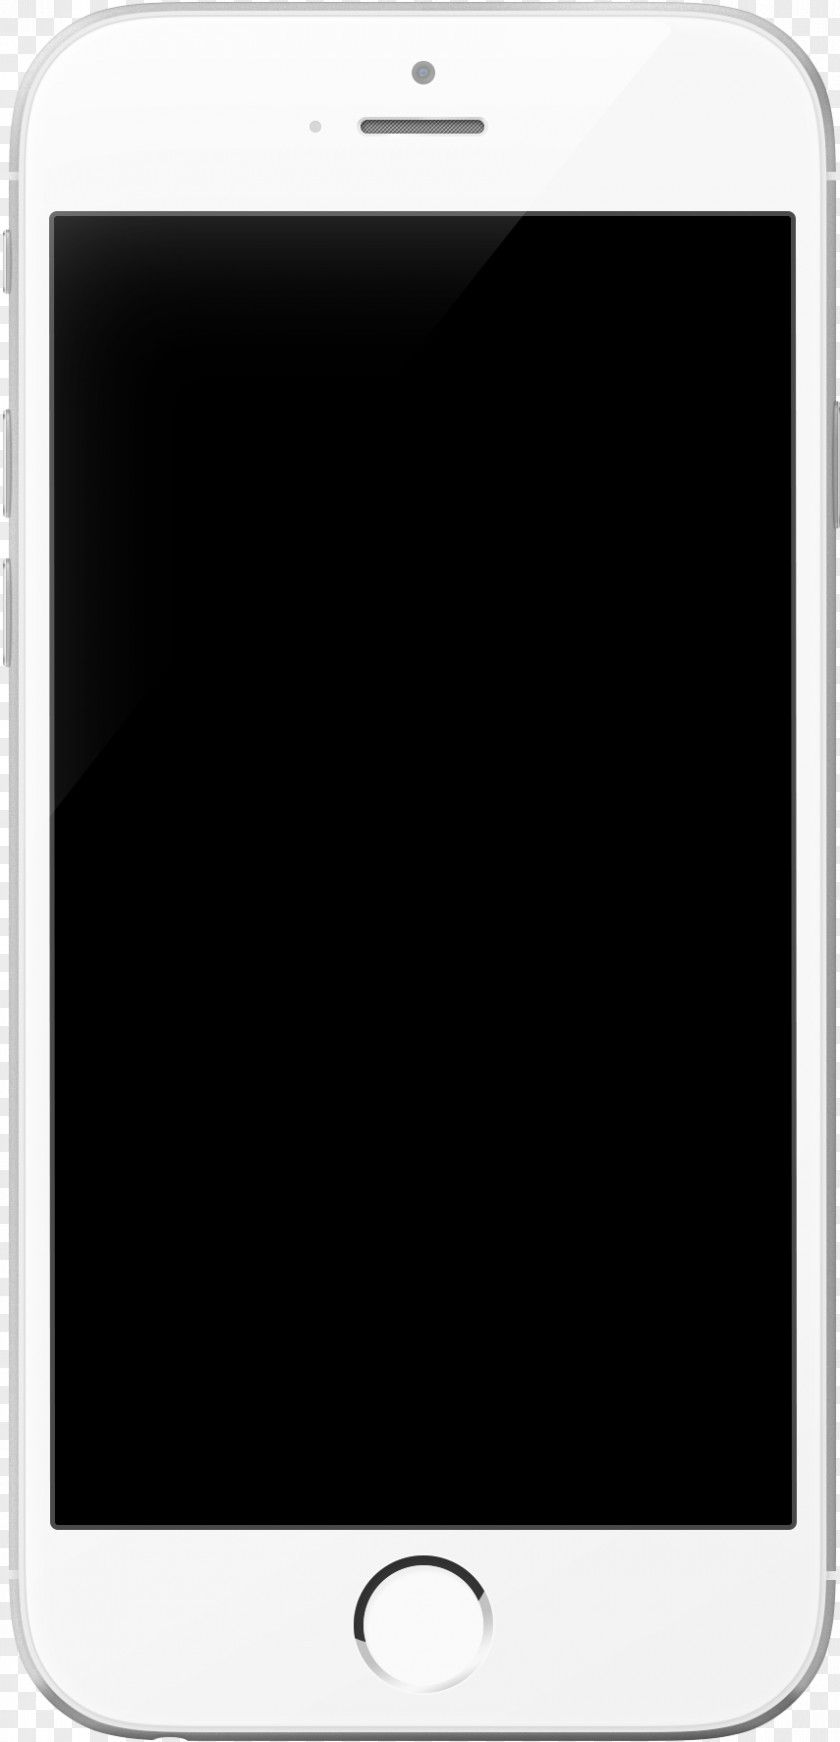 Iphone Template IPhone 6 Clip Art Image Vector Graphics PNG